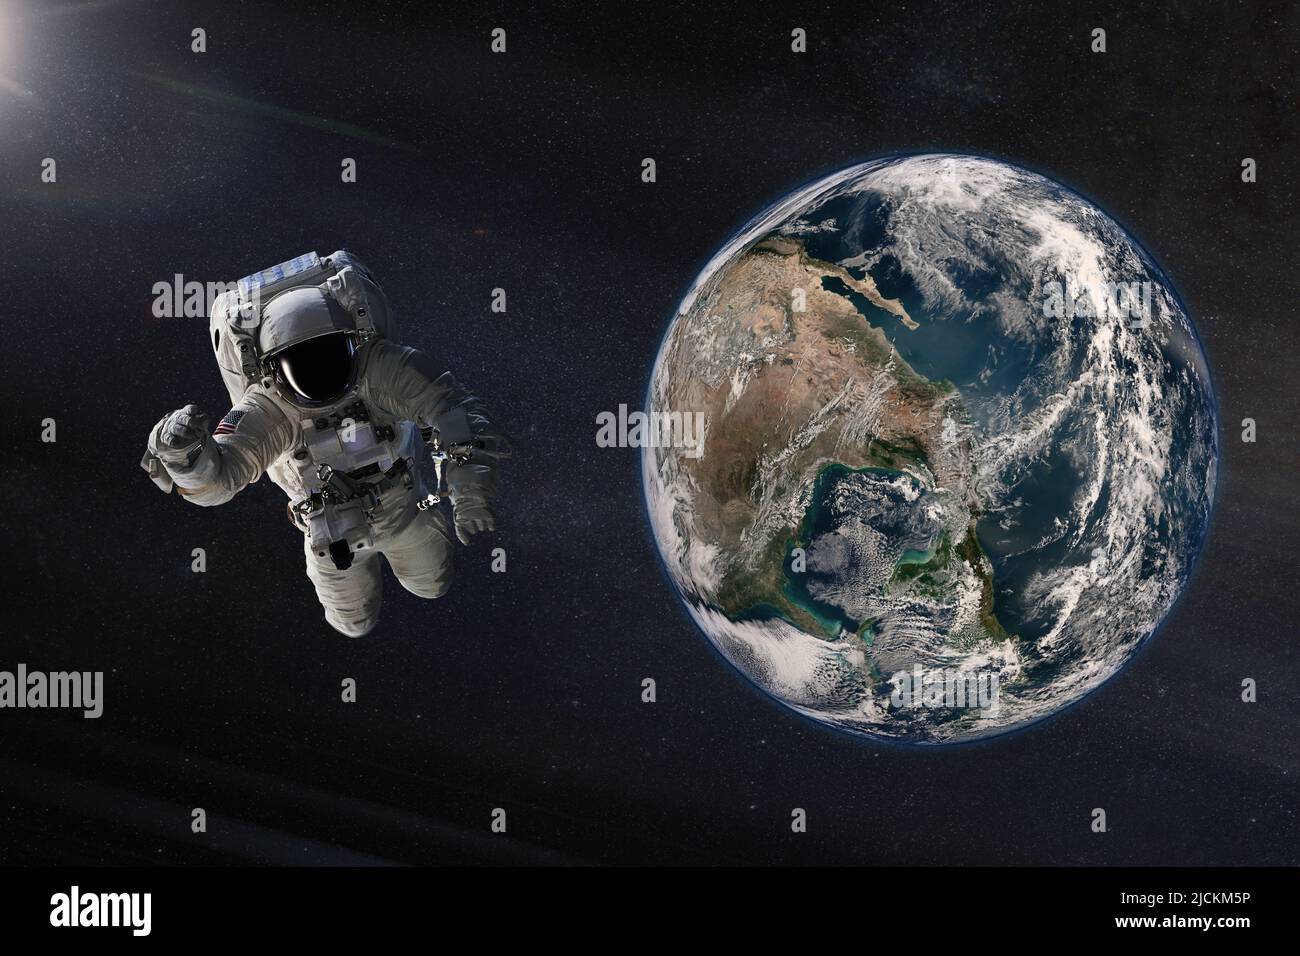 Spaceman in outer space with Earth planet. Elements of this image furnished by NASA. Stock Photo